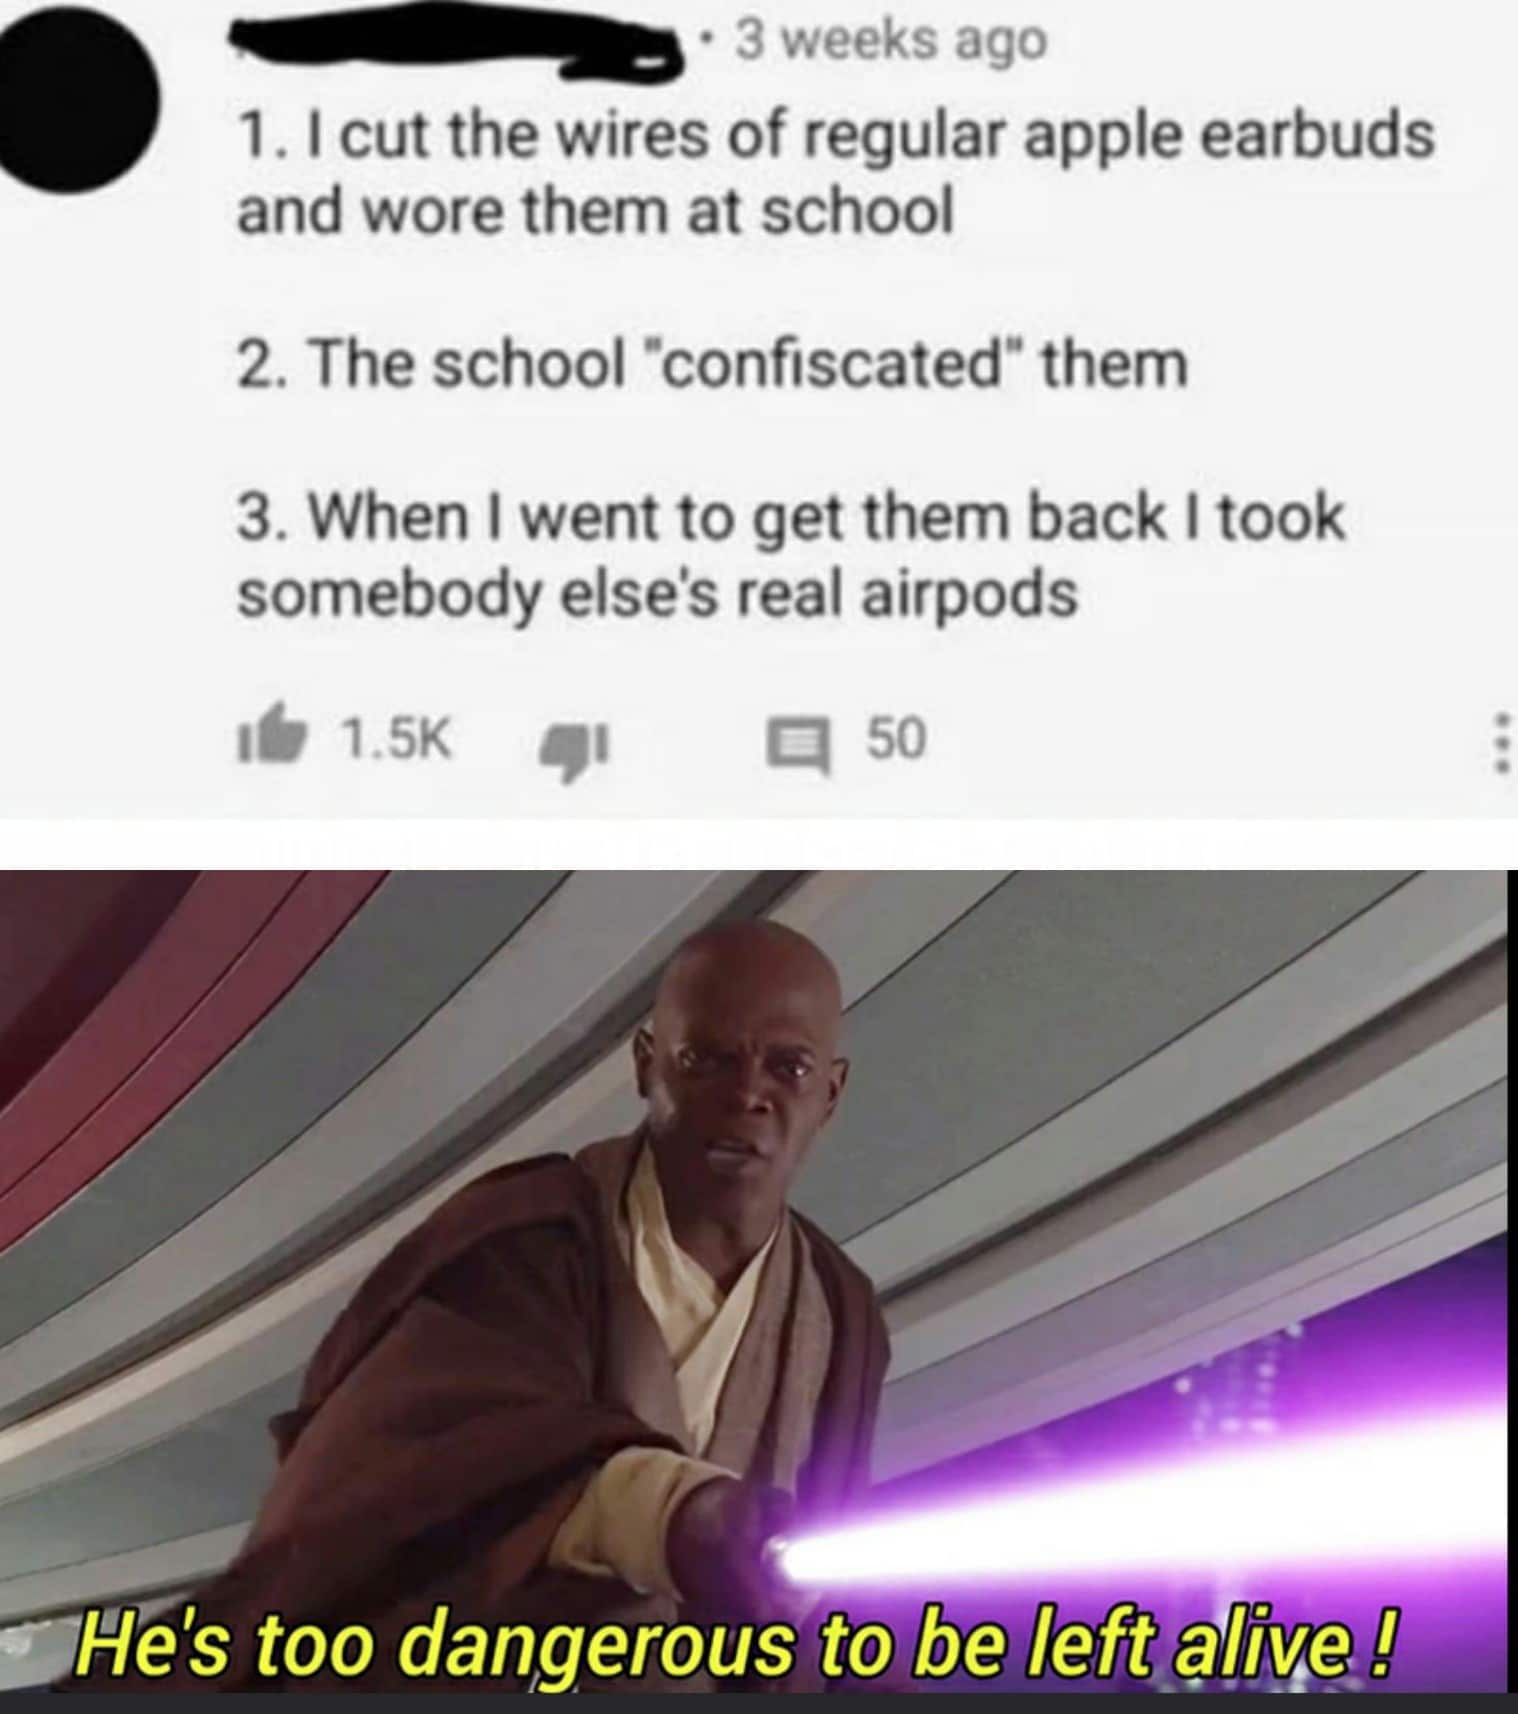 Prequel-memes, AirPods, Pods, PlayStation, Blazers, Airpods Star Wars Memes Prequel-memes, AirPods, Pods, PlayStation, Blazers, Airpods text: • 3 weeks ago 1. I cut the wires of regular apple earbuds and wore them at school 2. The school •confiscated* them 3. When I went to get them back I took somebody else's real airpods 16 1.5K 51 q 50 s;He's too dangerous to be left@fryel 